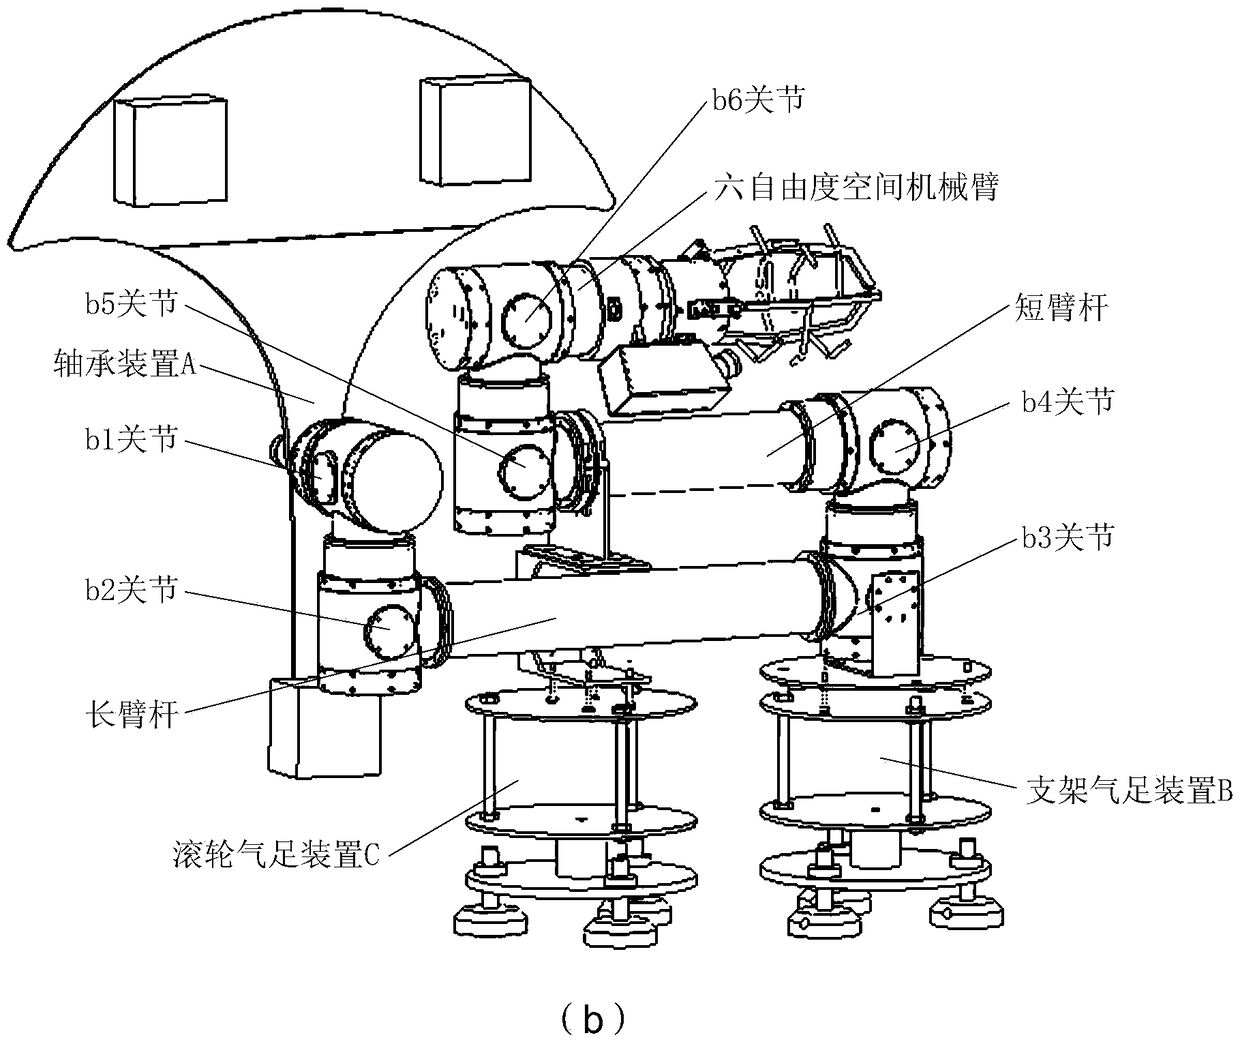 Six-degree-of-freedom space manipulator ground microgravity equivalent experimental device and experimental method